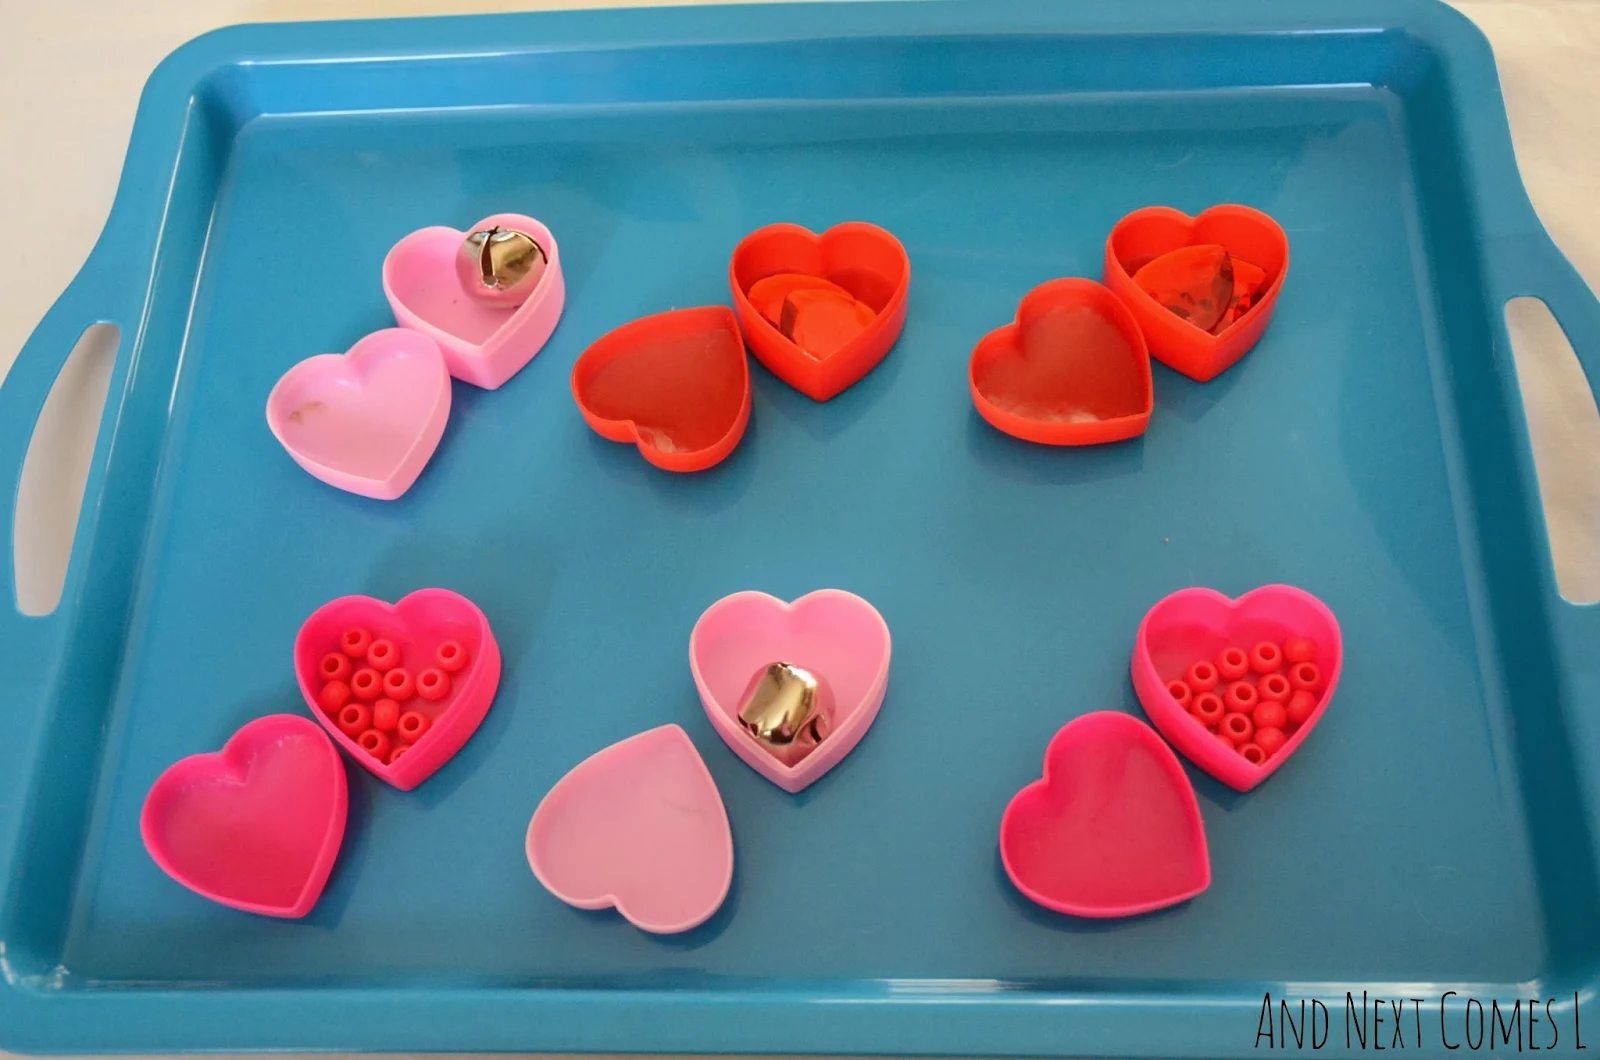 Inside of the Montessori inspired sound matching hearts for Valentine's Day from And Next Comes L